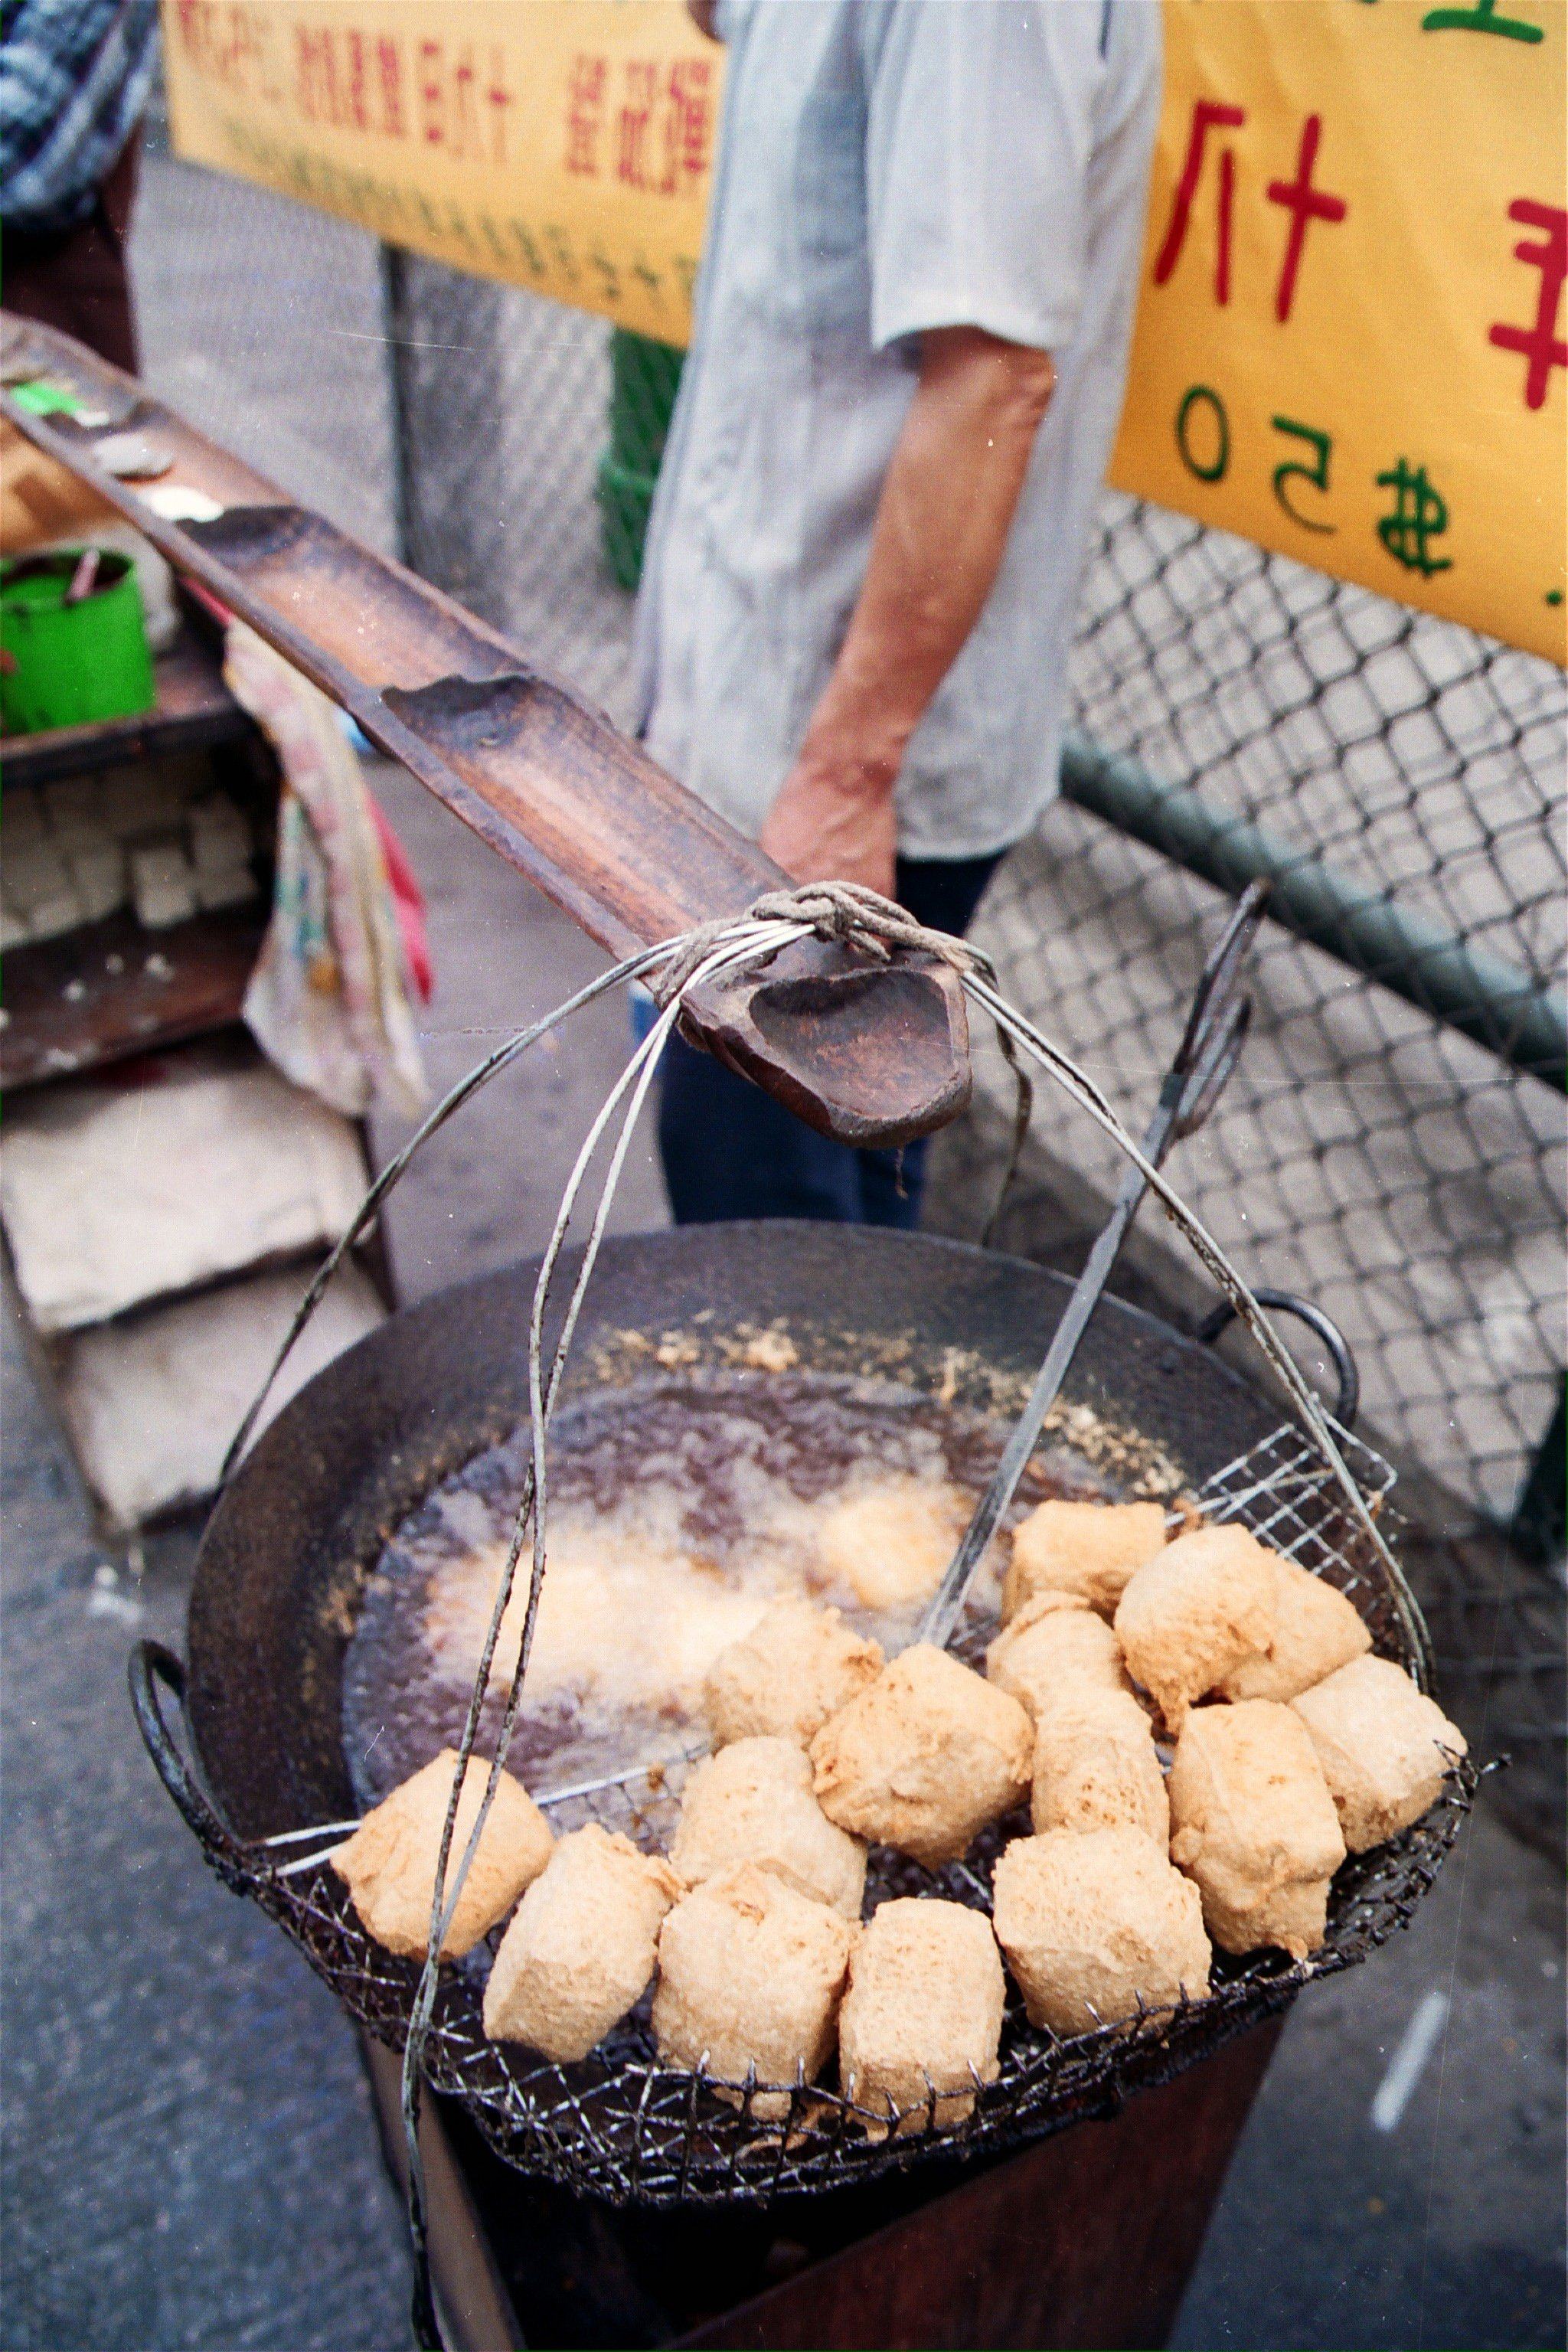 Blocks of fermented bean curd are deep-fried to make 
stinky tofu at a streetside snack stall in Hong Kong. Fermented tofu is a staple of cuisines across China and the diaspora. Photo: SCMP